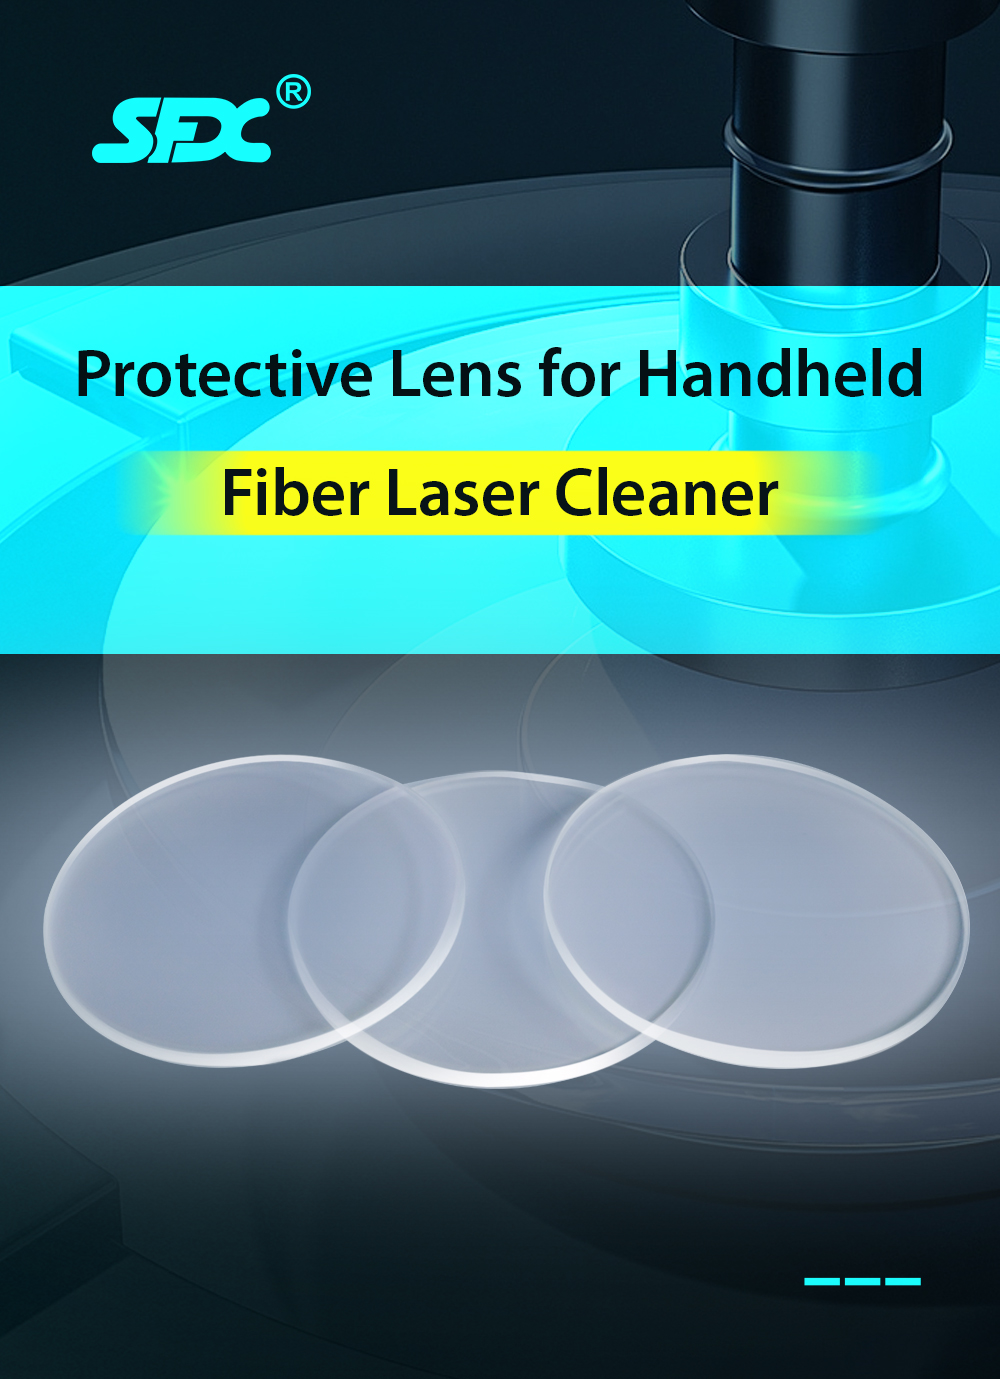 SFX Laser Protective Lenses for SFX 200W/300W Pulse Laser Cleaning Machines 3pcs /10 pcs Package SFX Laser Protective Lenses for SFX 200W/300W Pulse Laser Cleaning Machines 3pcs /10 pcs Package SFX Laser Protective Lenses,sfx handheld laser cleaning machine,1000w rust laser cleaner,1500w laser cleaner,2000w laser cleaner